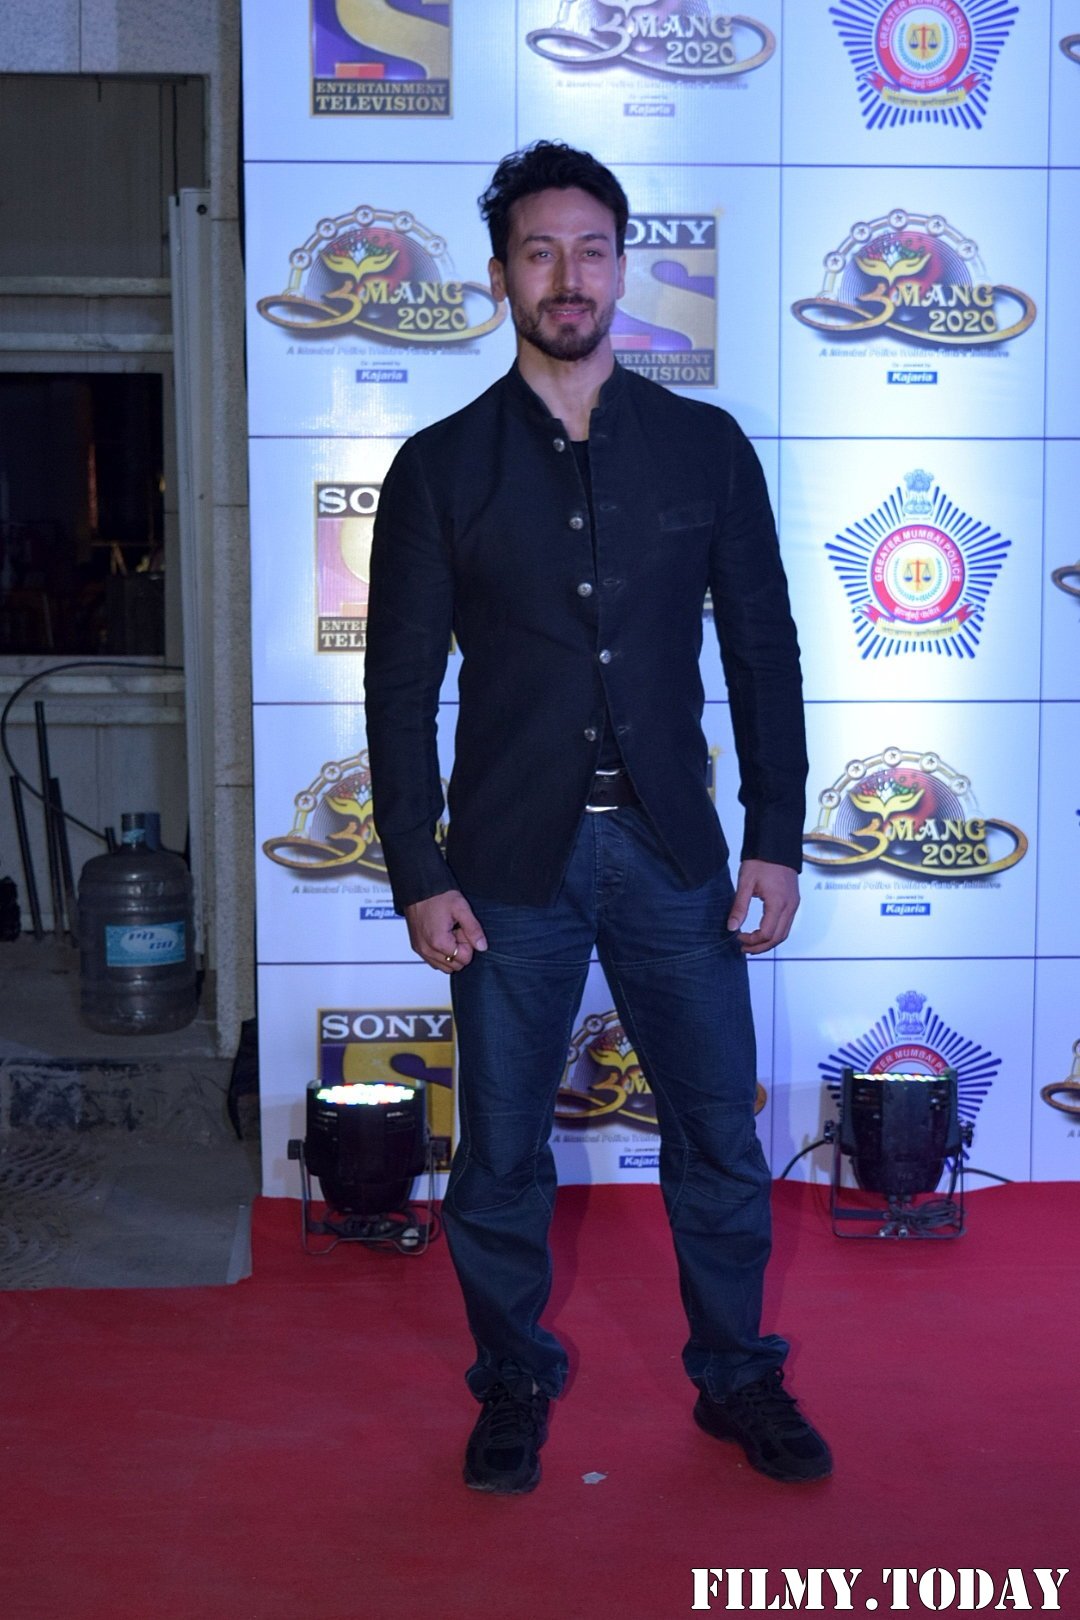 Tiger Shroff - Photos: Celebs At Umang Police Festival At Jio World Centre | Picture 1716193